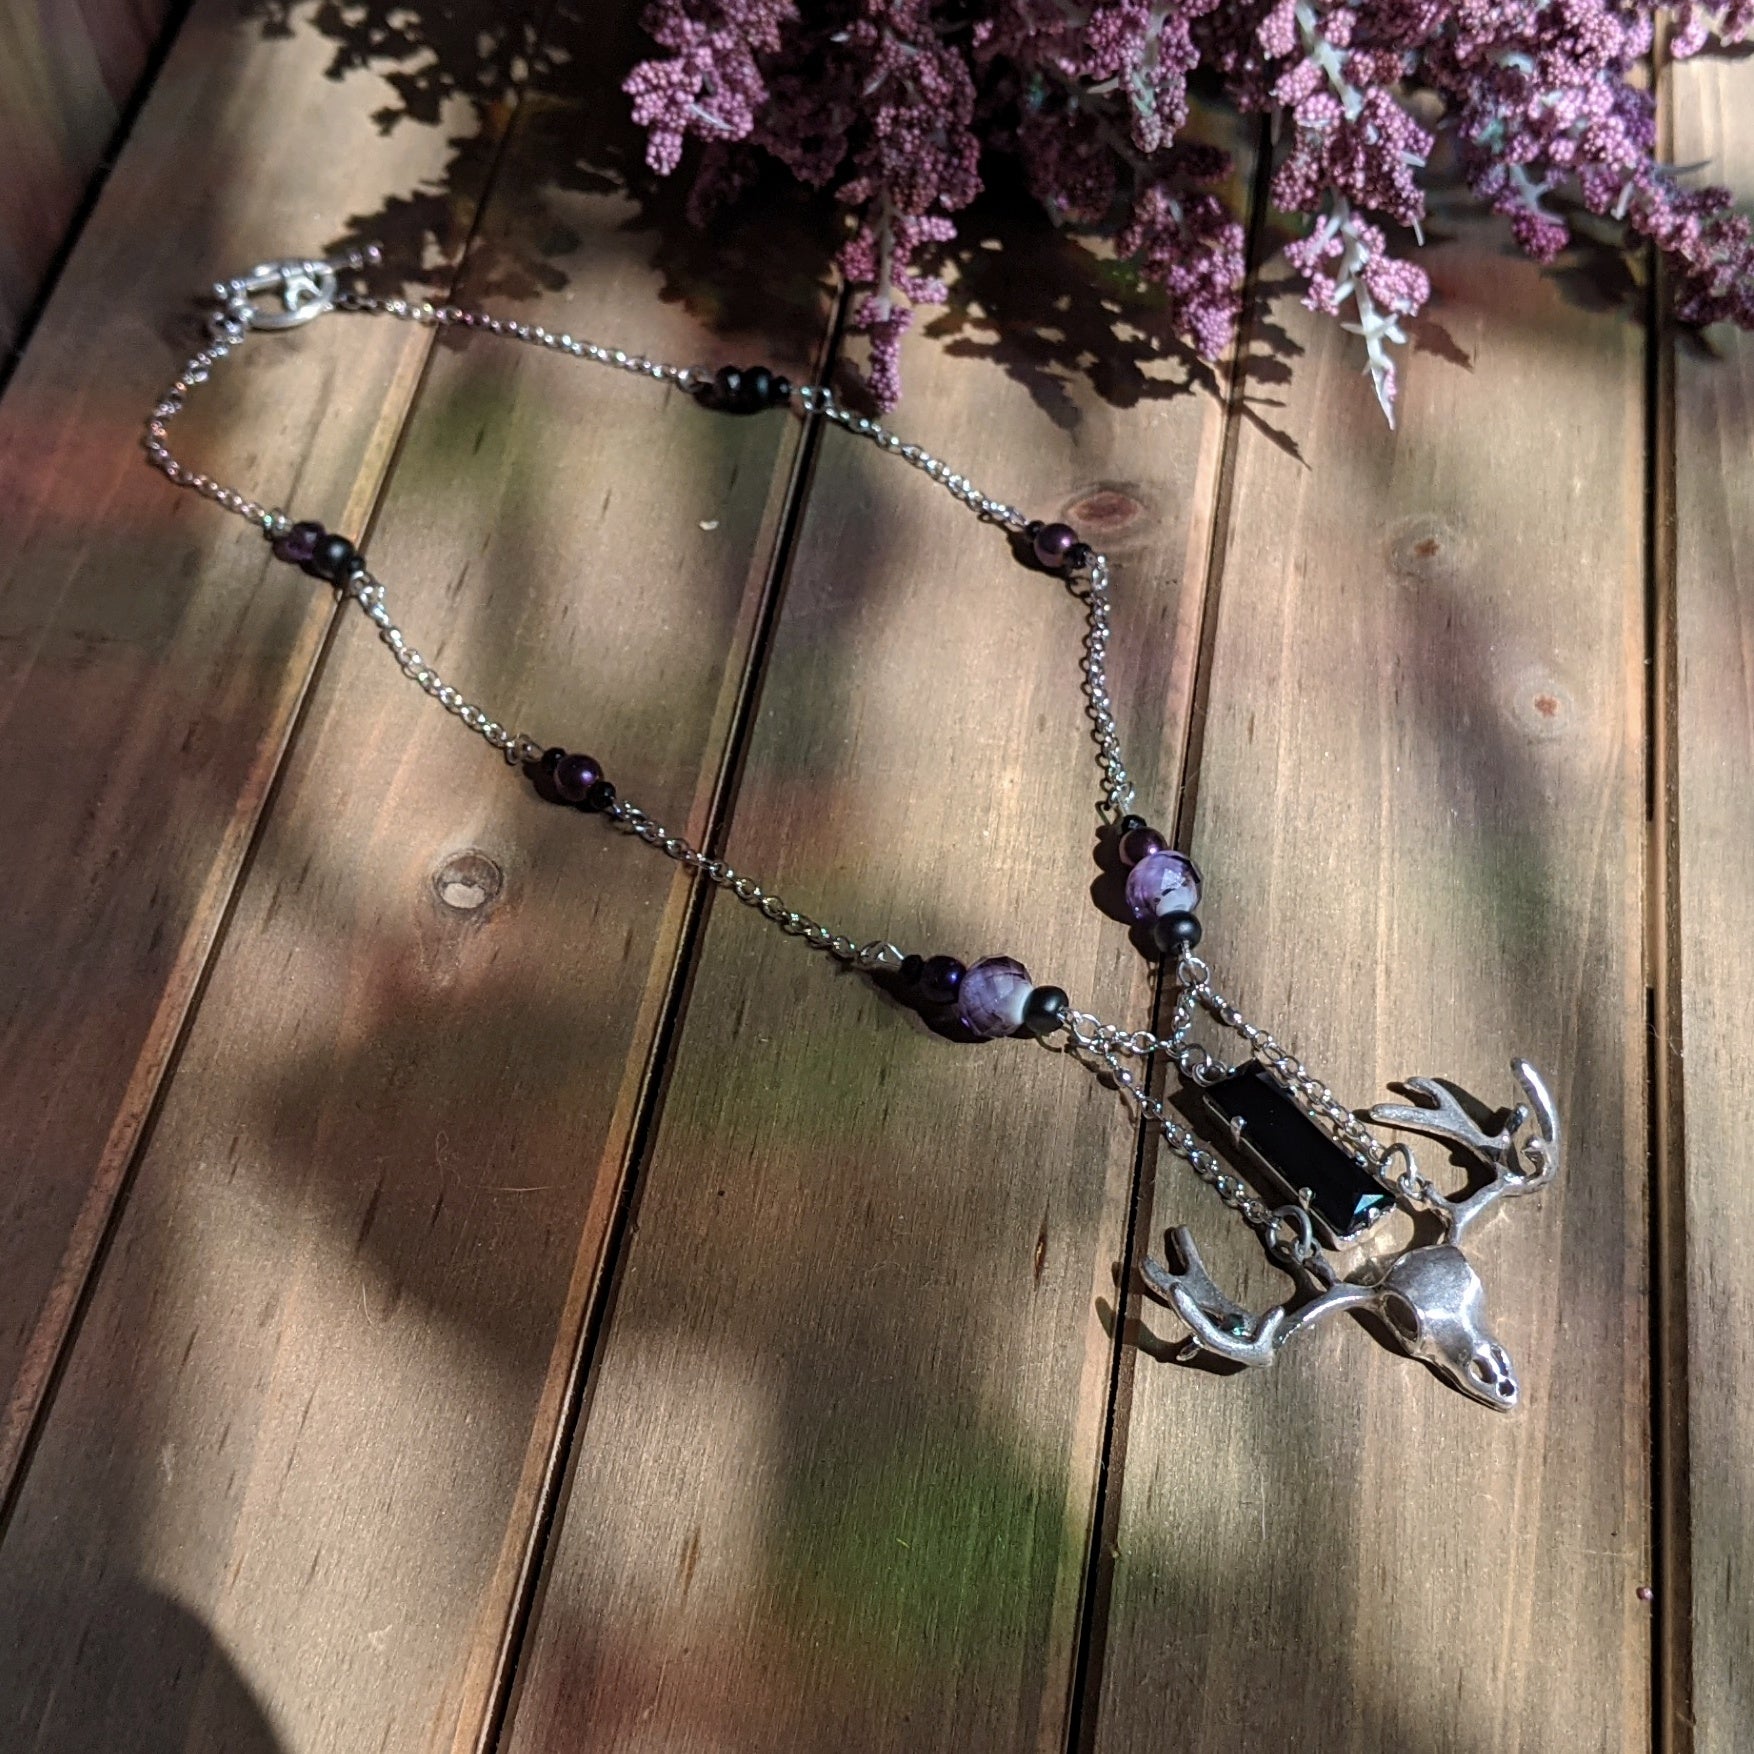 A silver deer skull necklace with a black rectangular stone hanging above it on a silver chain dotted with black and purple beads.